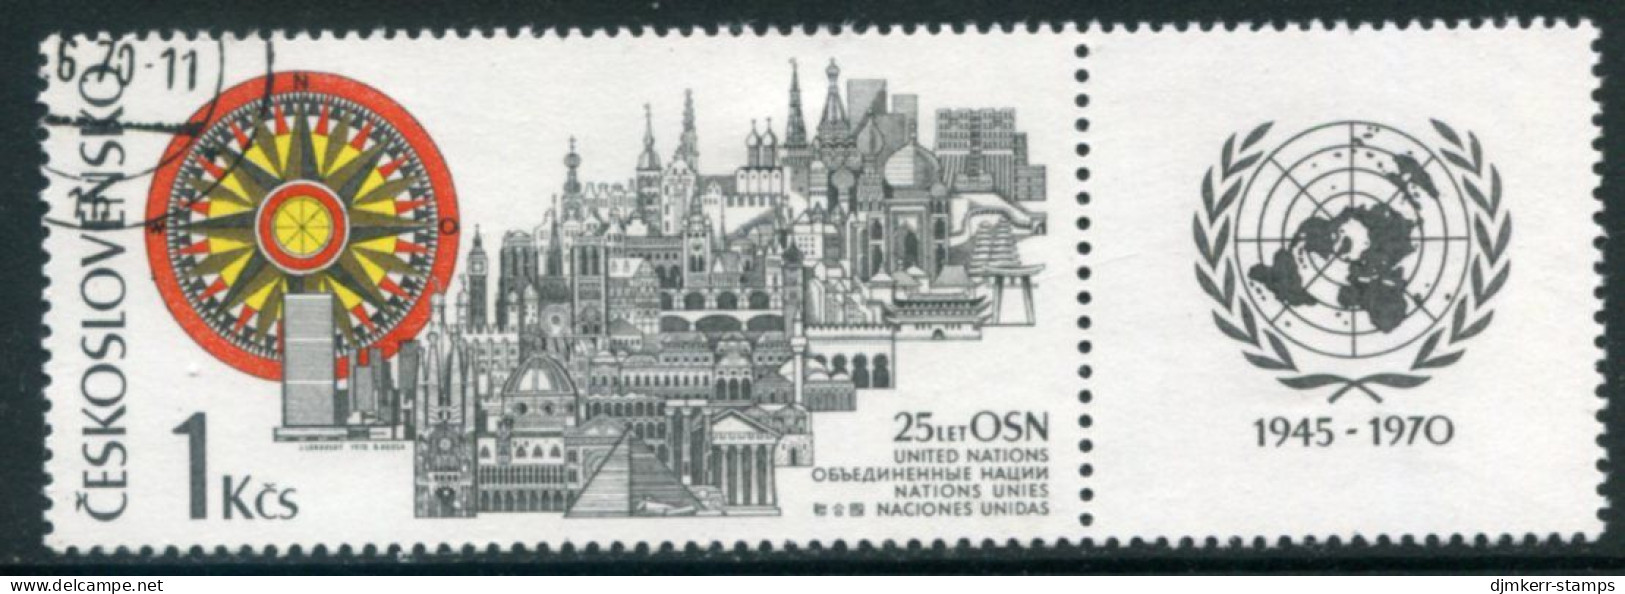 CZECHOSLOVAKIA 1970 UNO 25th Anniversary With Label Used Michel 1945 Zf - Oblitérés